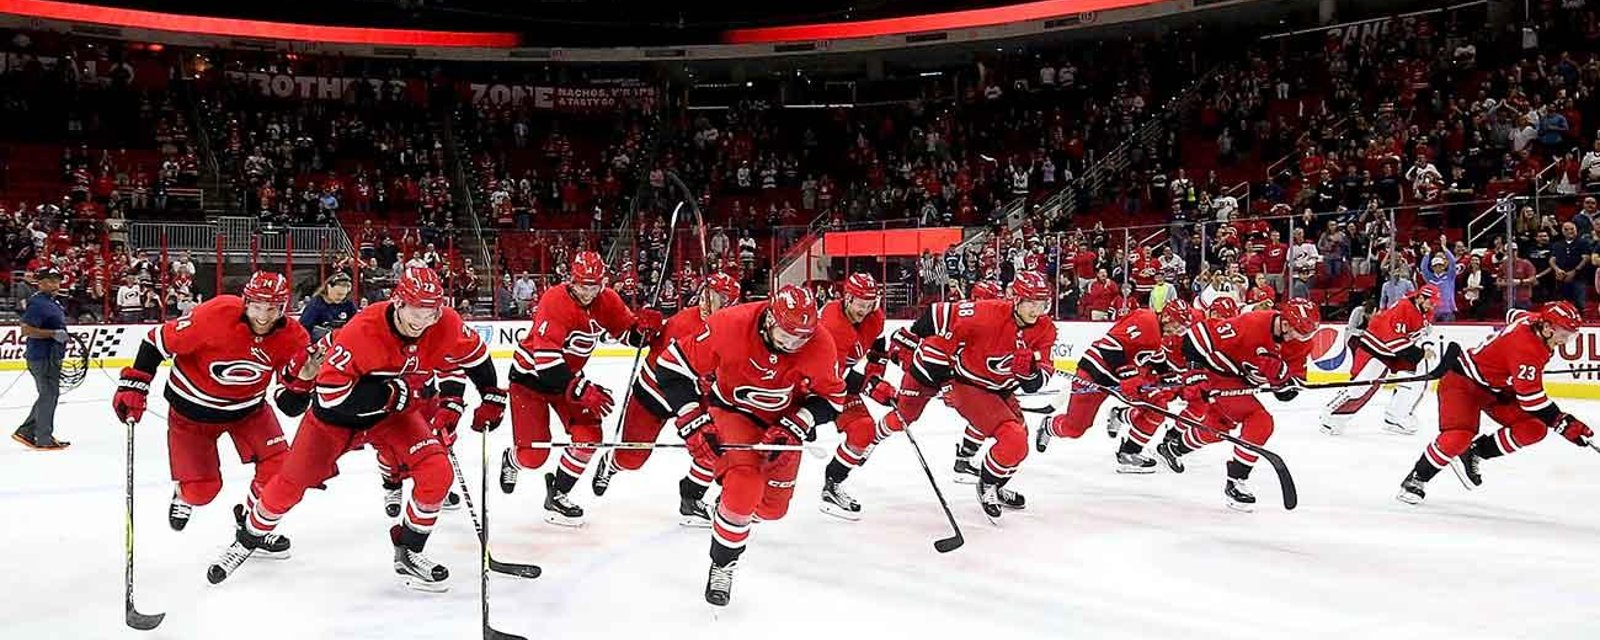 A weird part of the Hurricanes’ arena somehow ended up on Craigslist